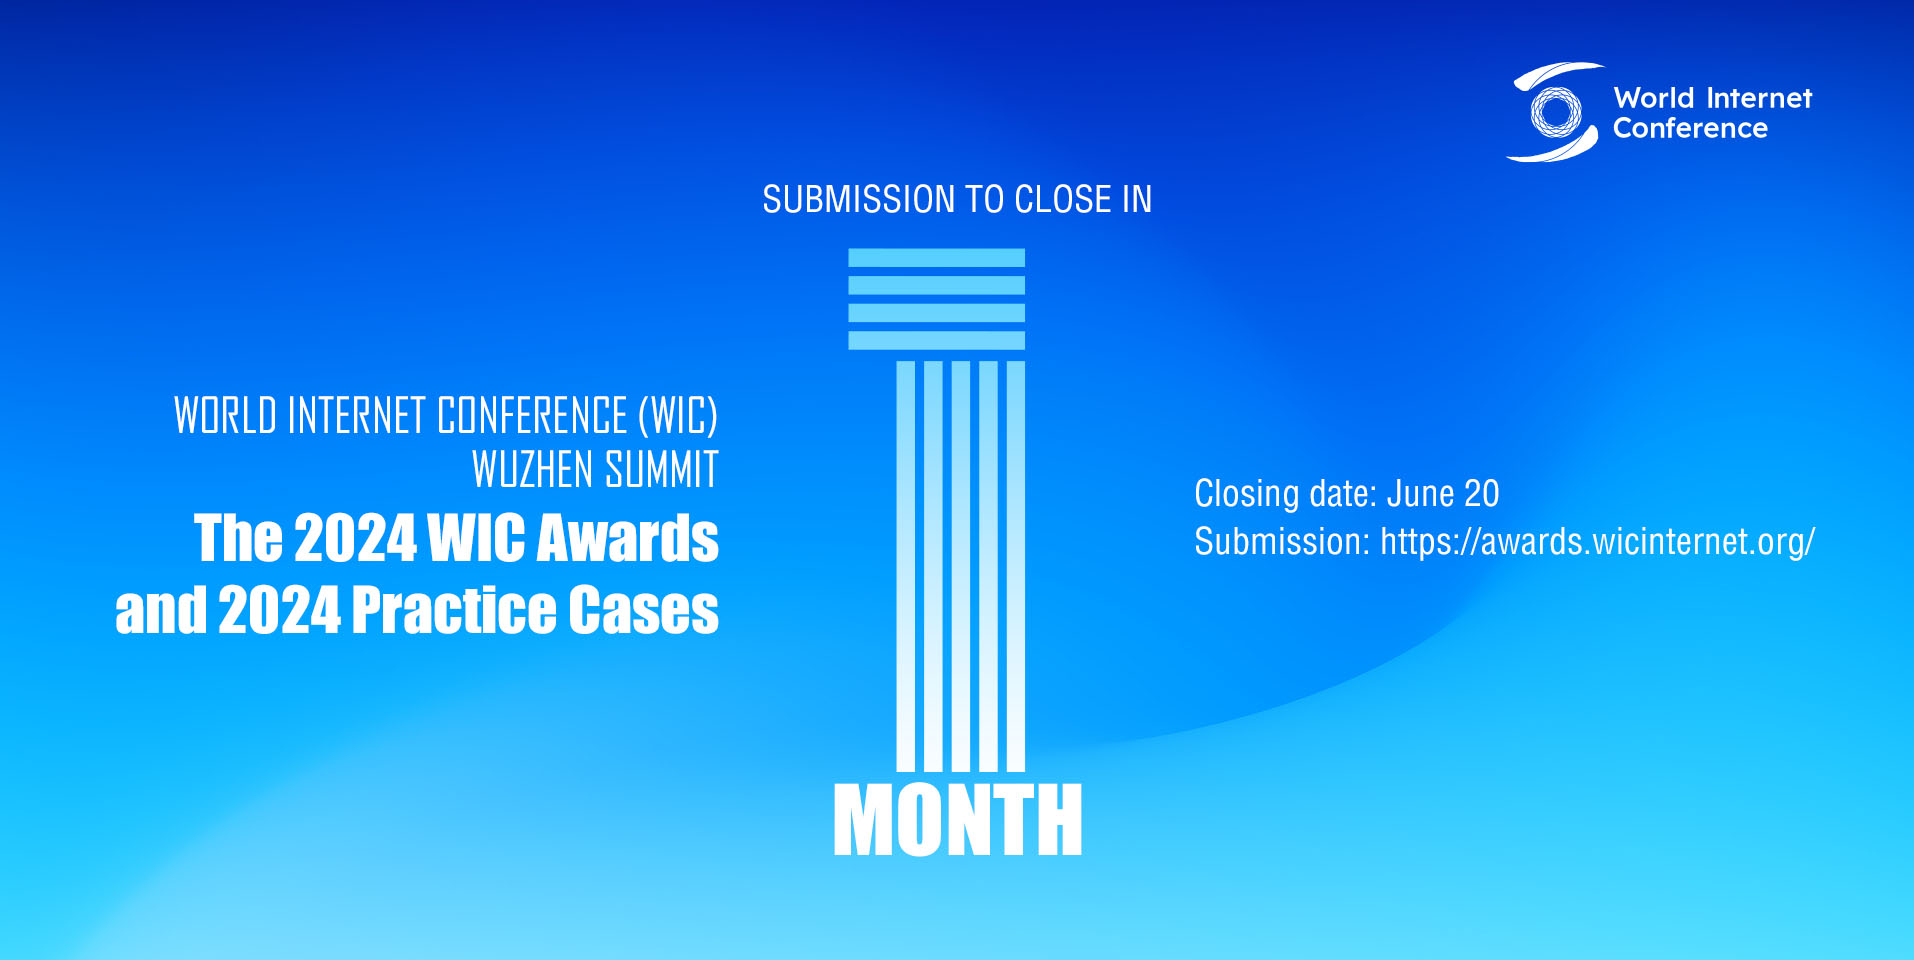 Submission of 2024 WIC Awards and Practice Cases to close in 1 month 